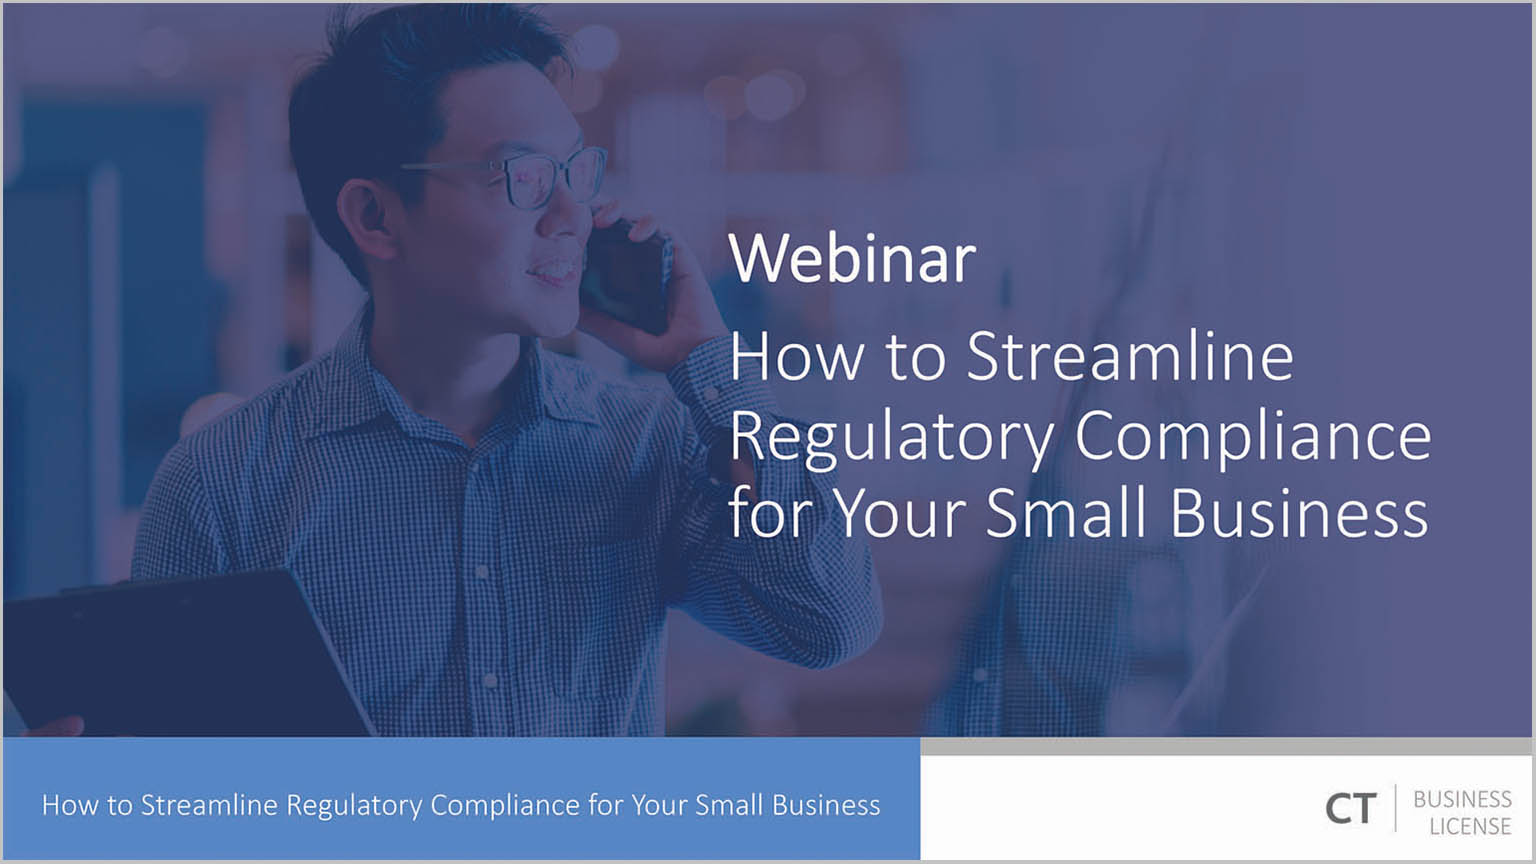 Webinar: How to Streamline Regulatory Compliance for Your Small Business